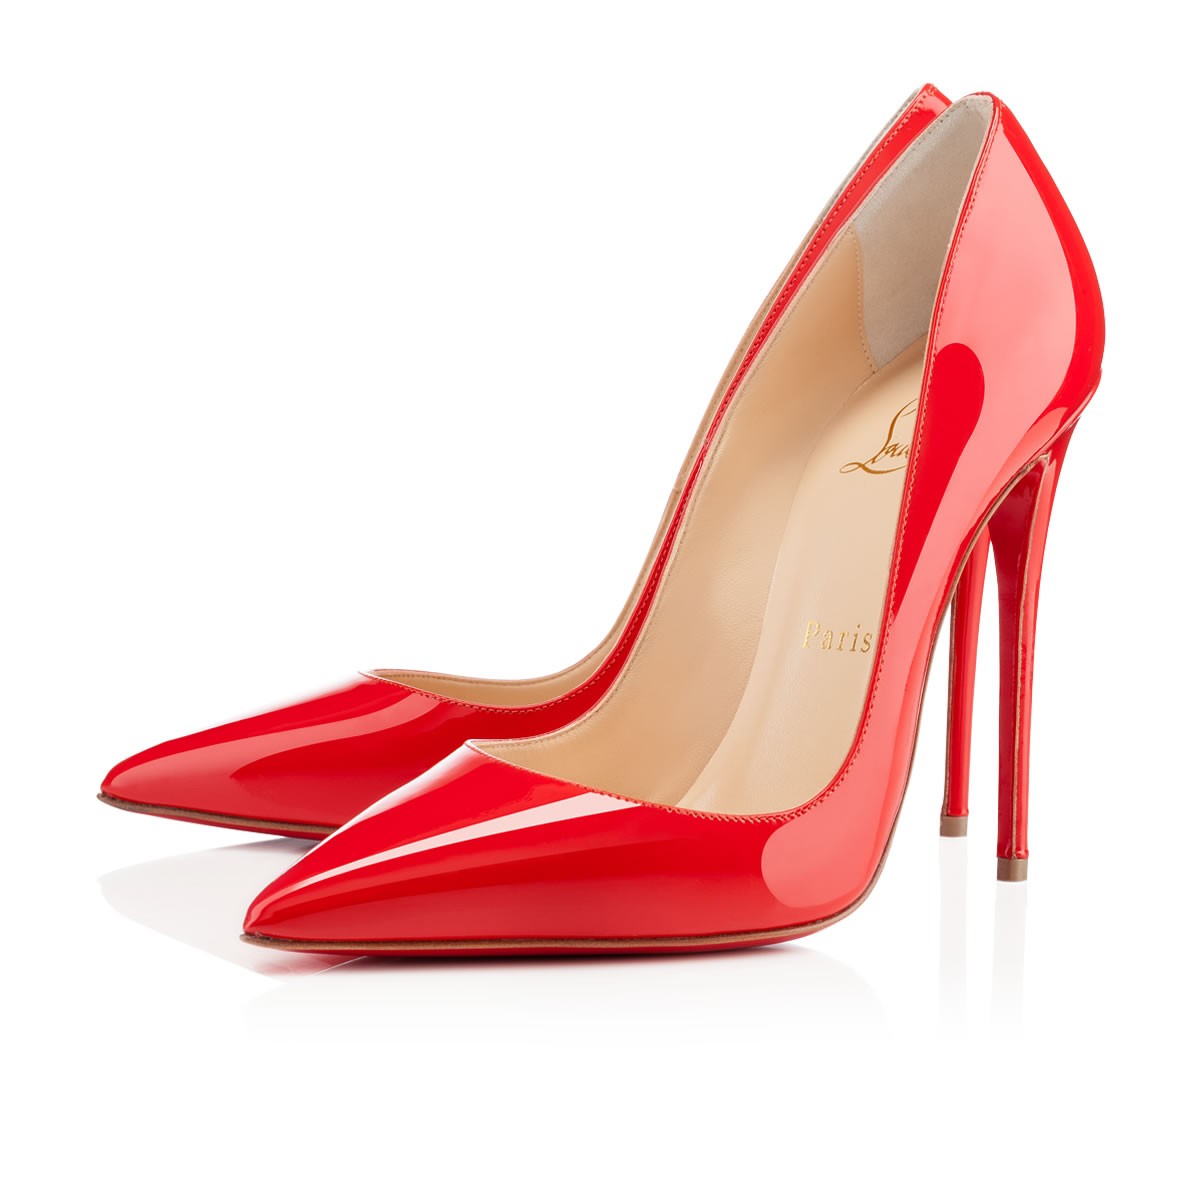 Lyst - Christian Louboutin So Kate in Red